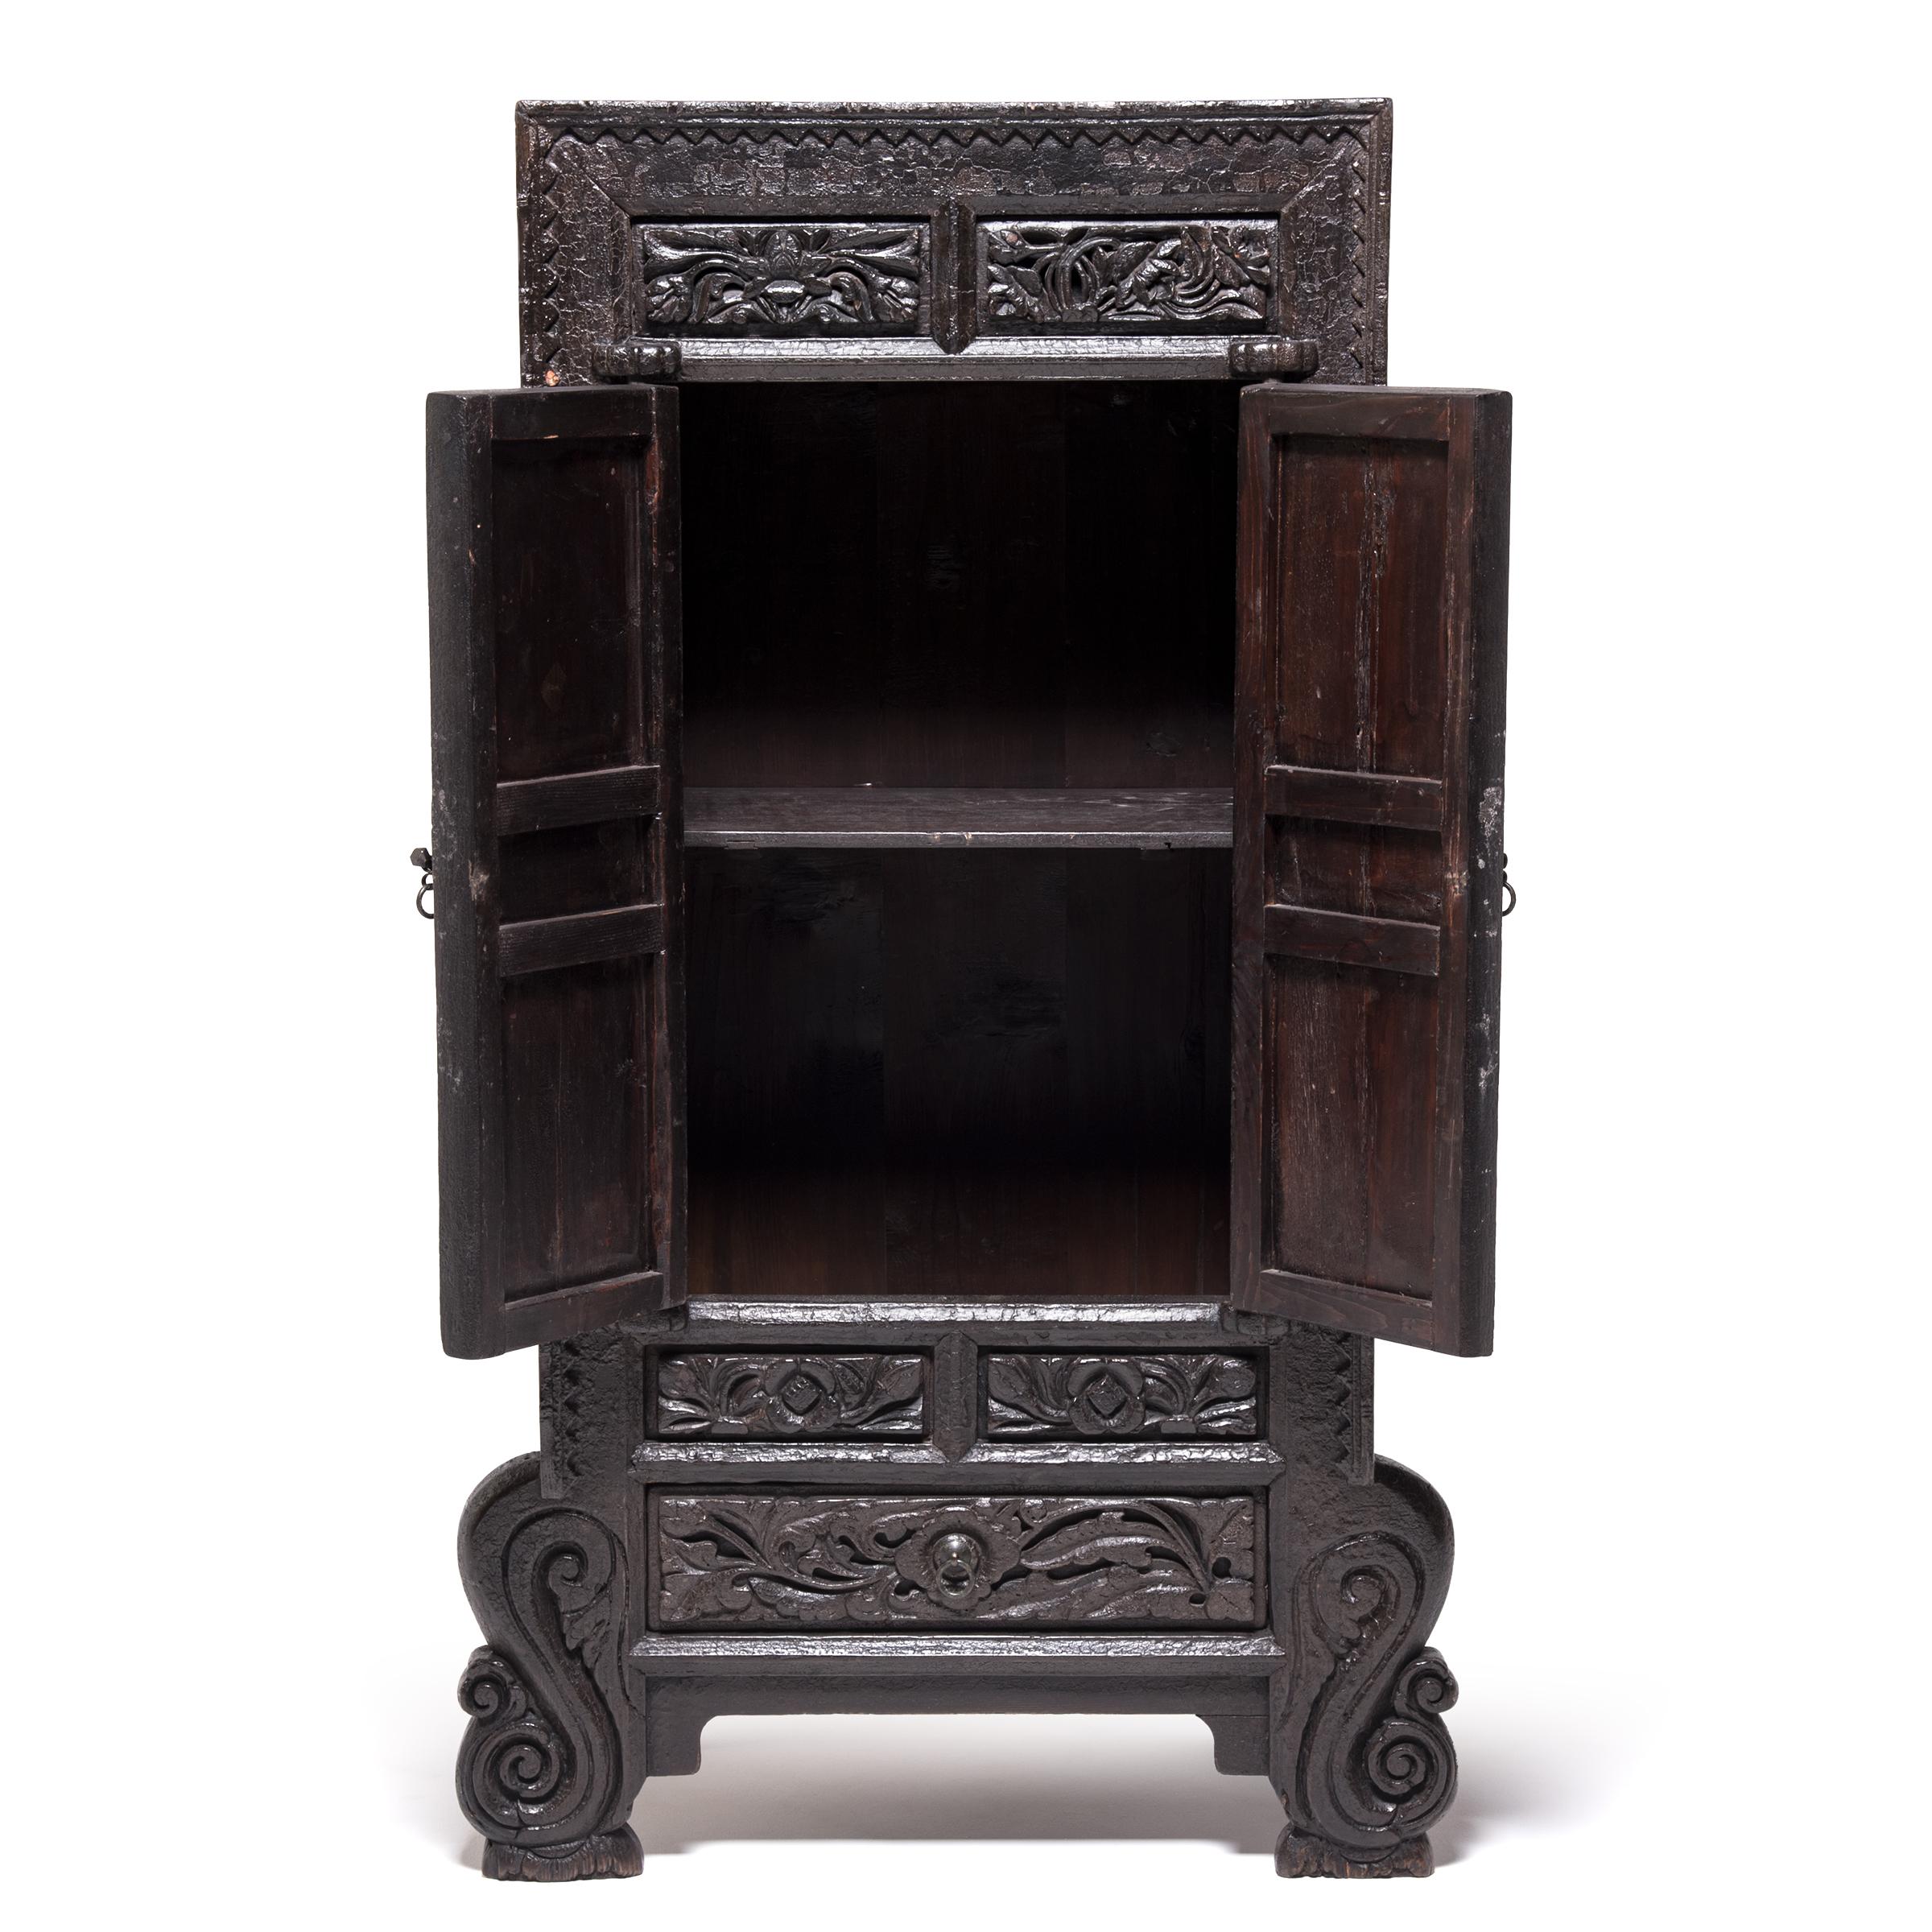 Qing Pair of Ornate Lacquered Cabinets with Cabriole Legs, c. 1850 For Sale